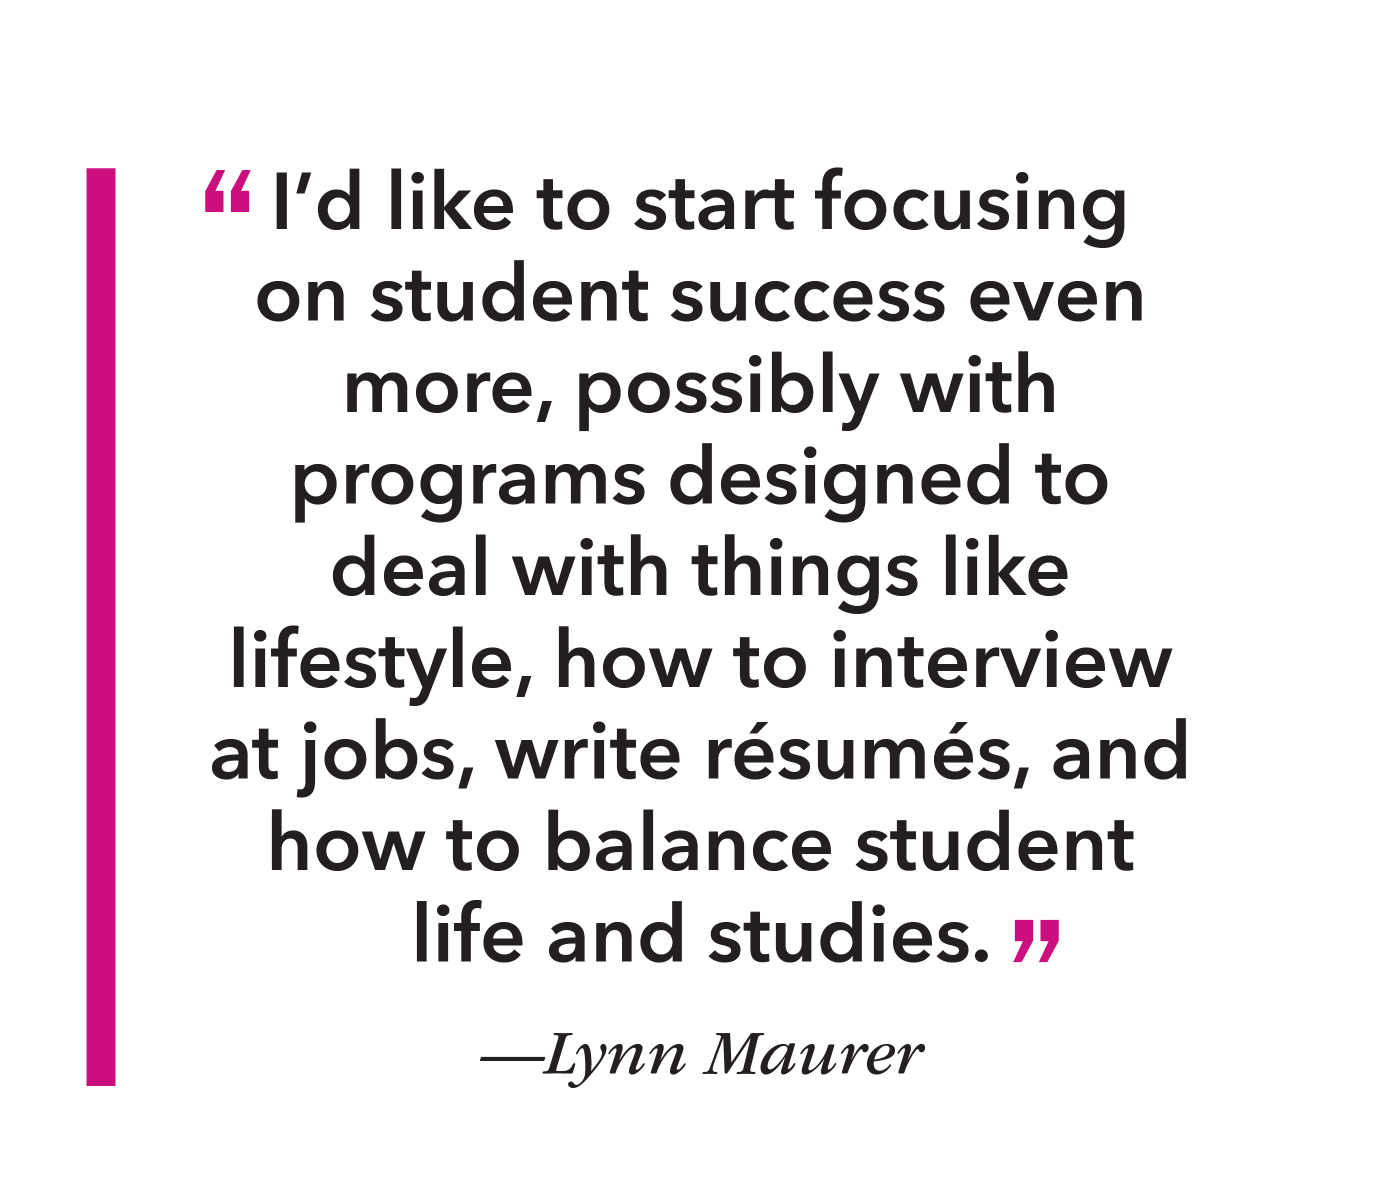 Quote I’d like to start focusing on student success even more, possibly with programs designed to deal with things like lifestyle, how to interview at jobs, write résumés, and how to balance student life and studies.”